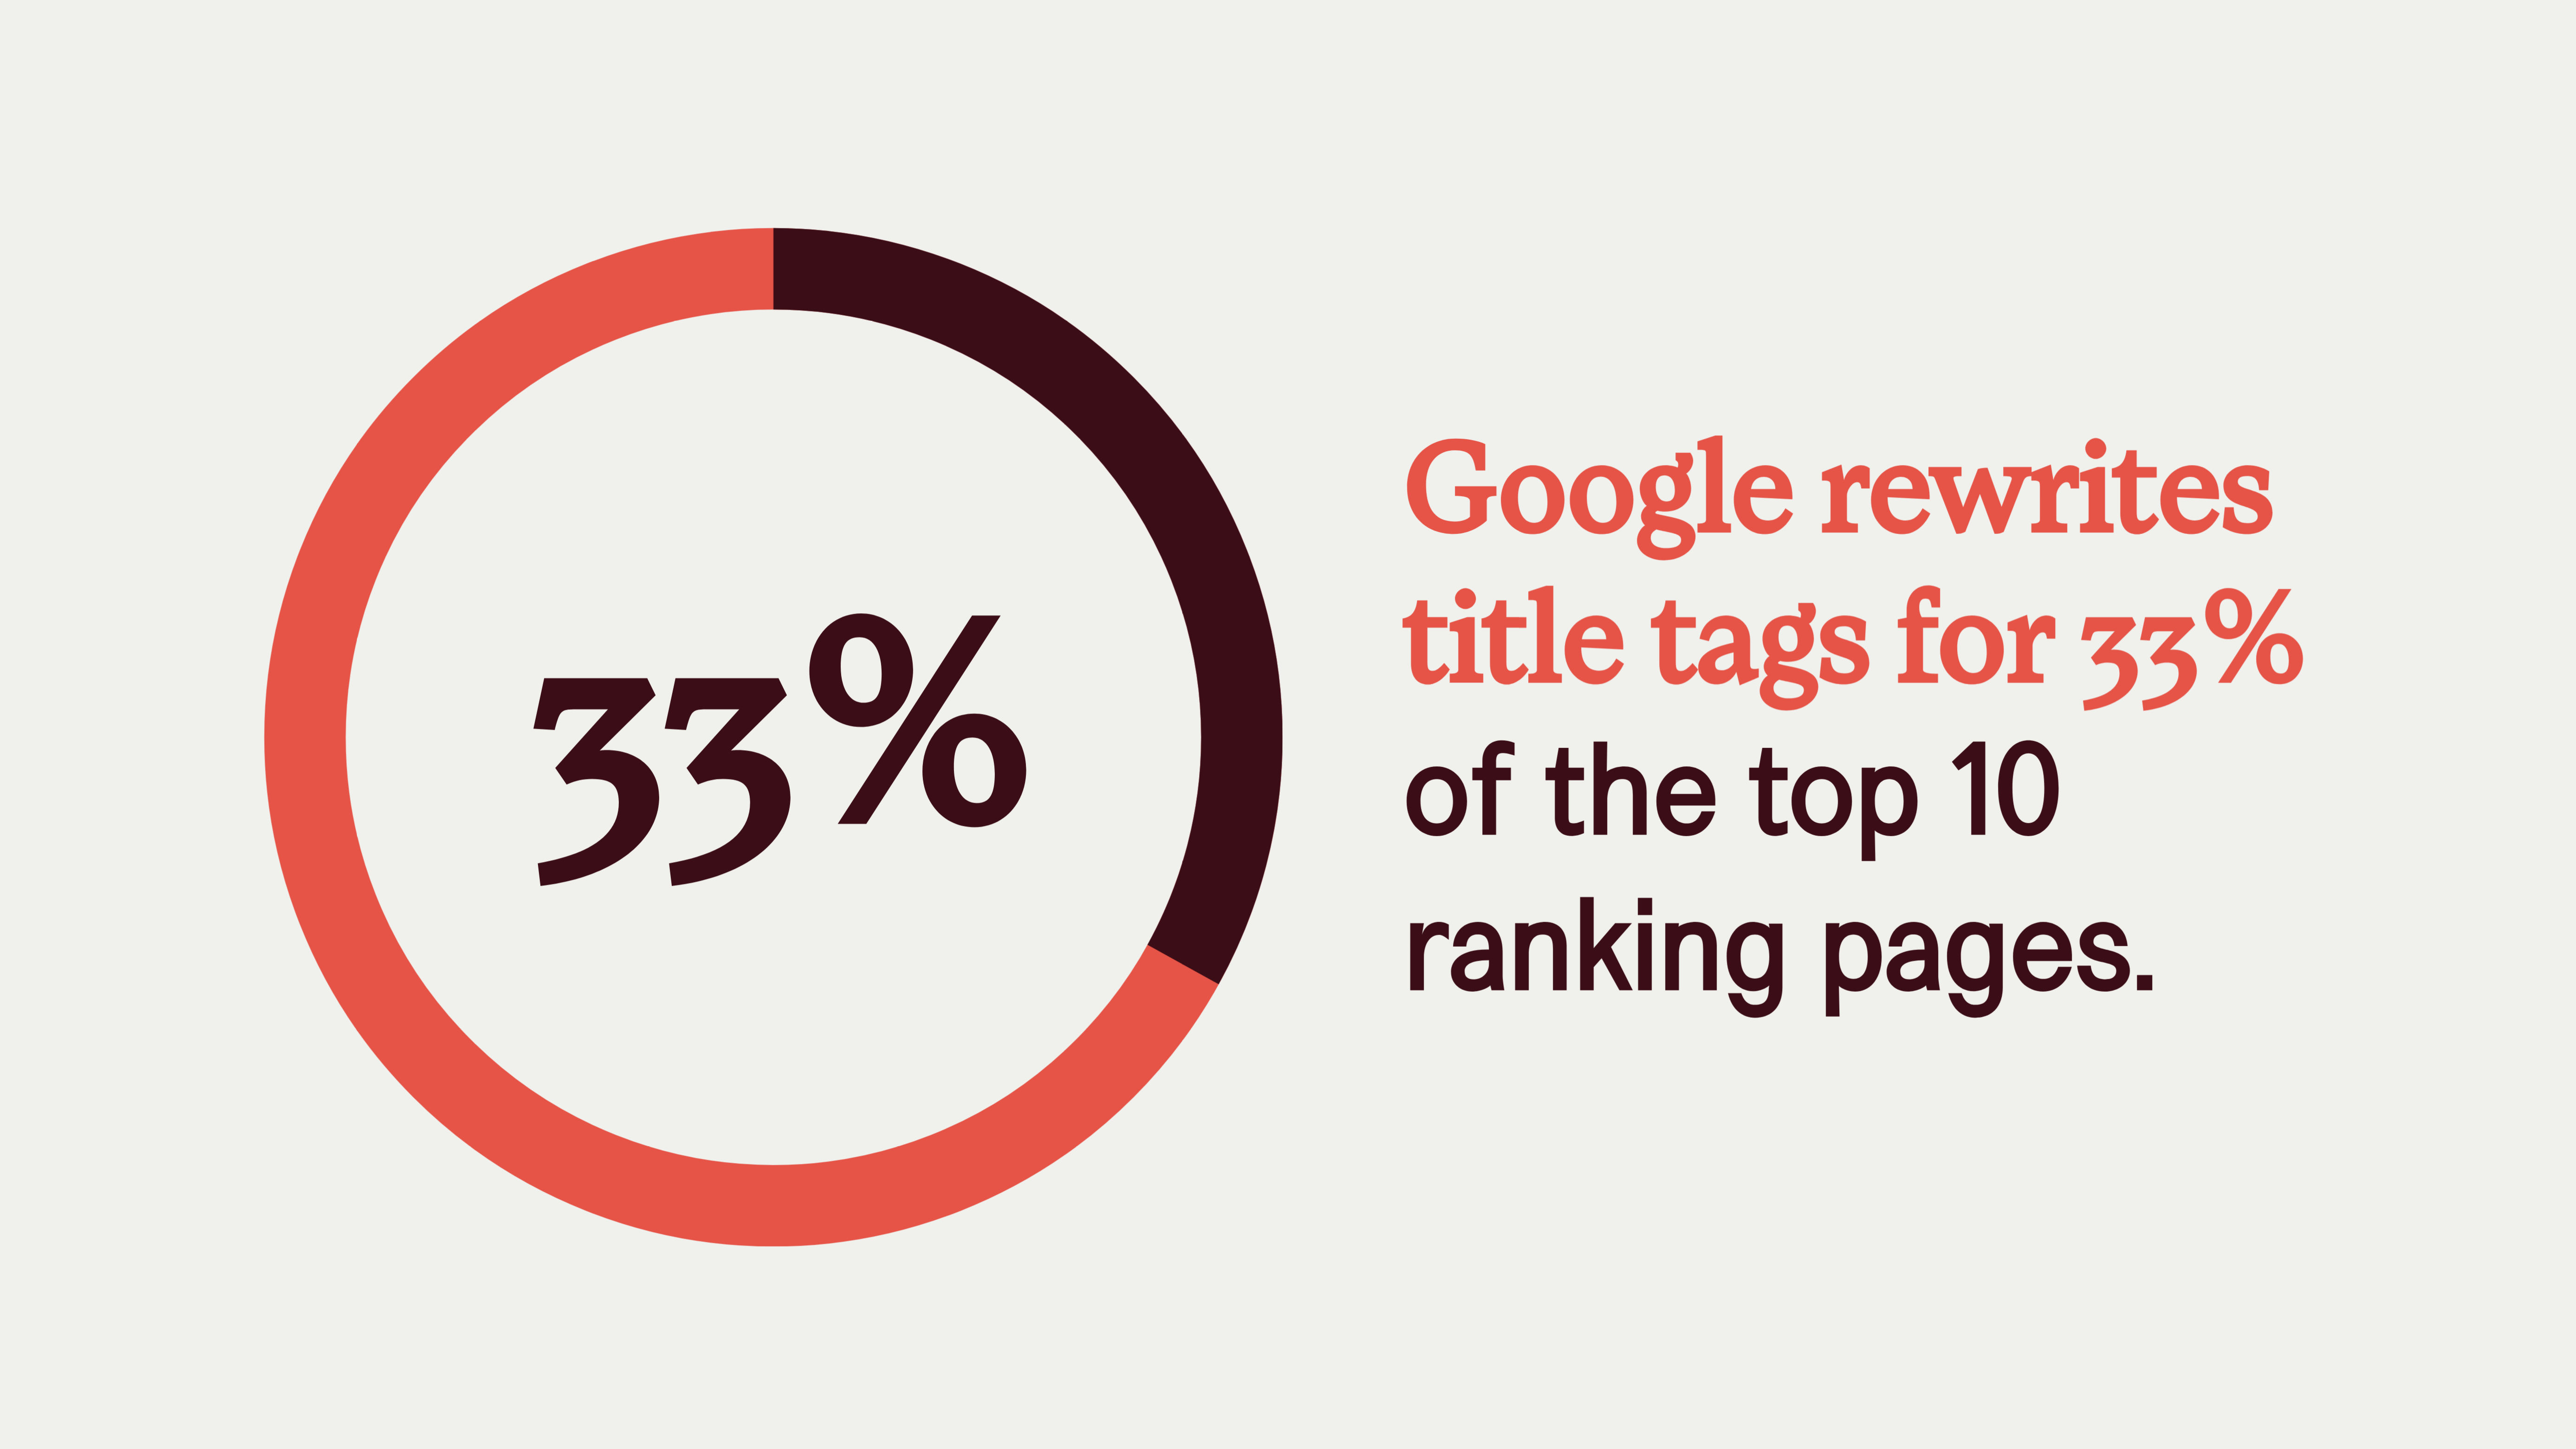 seo google statistics: Google rewrites title tags for 33% of the top 10 ranking pages